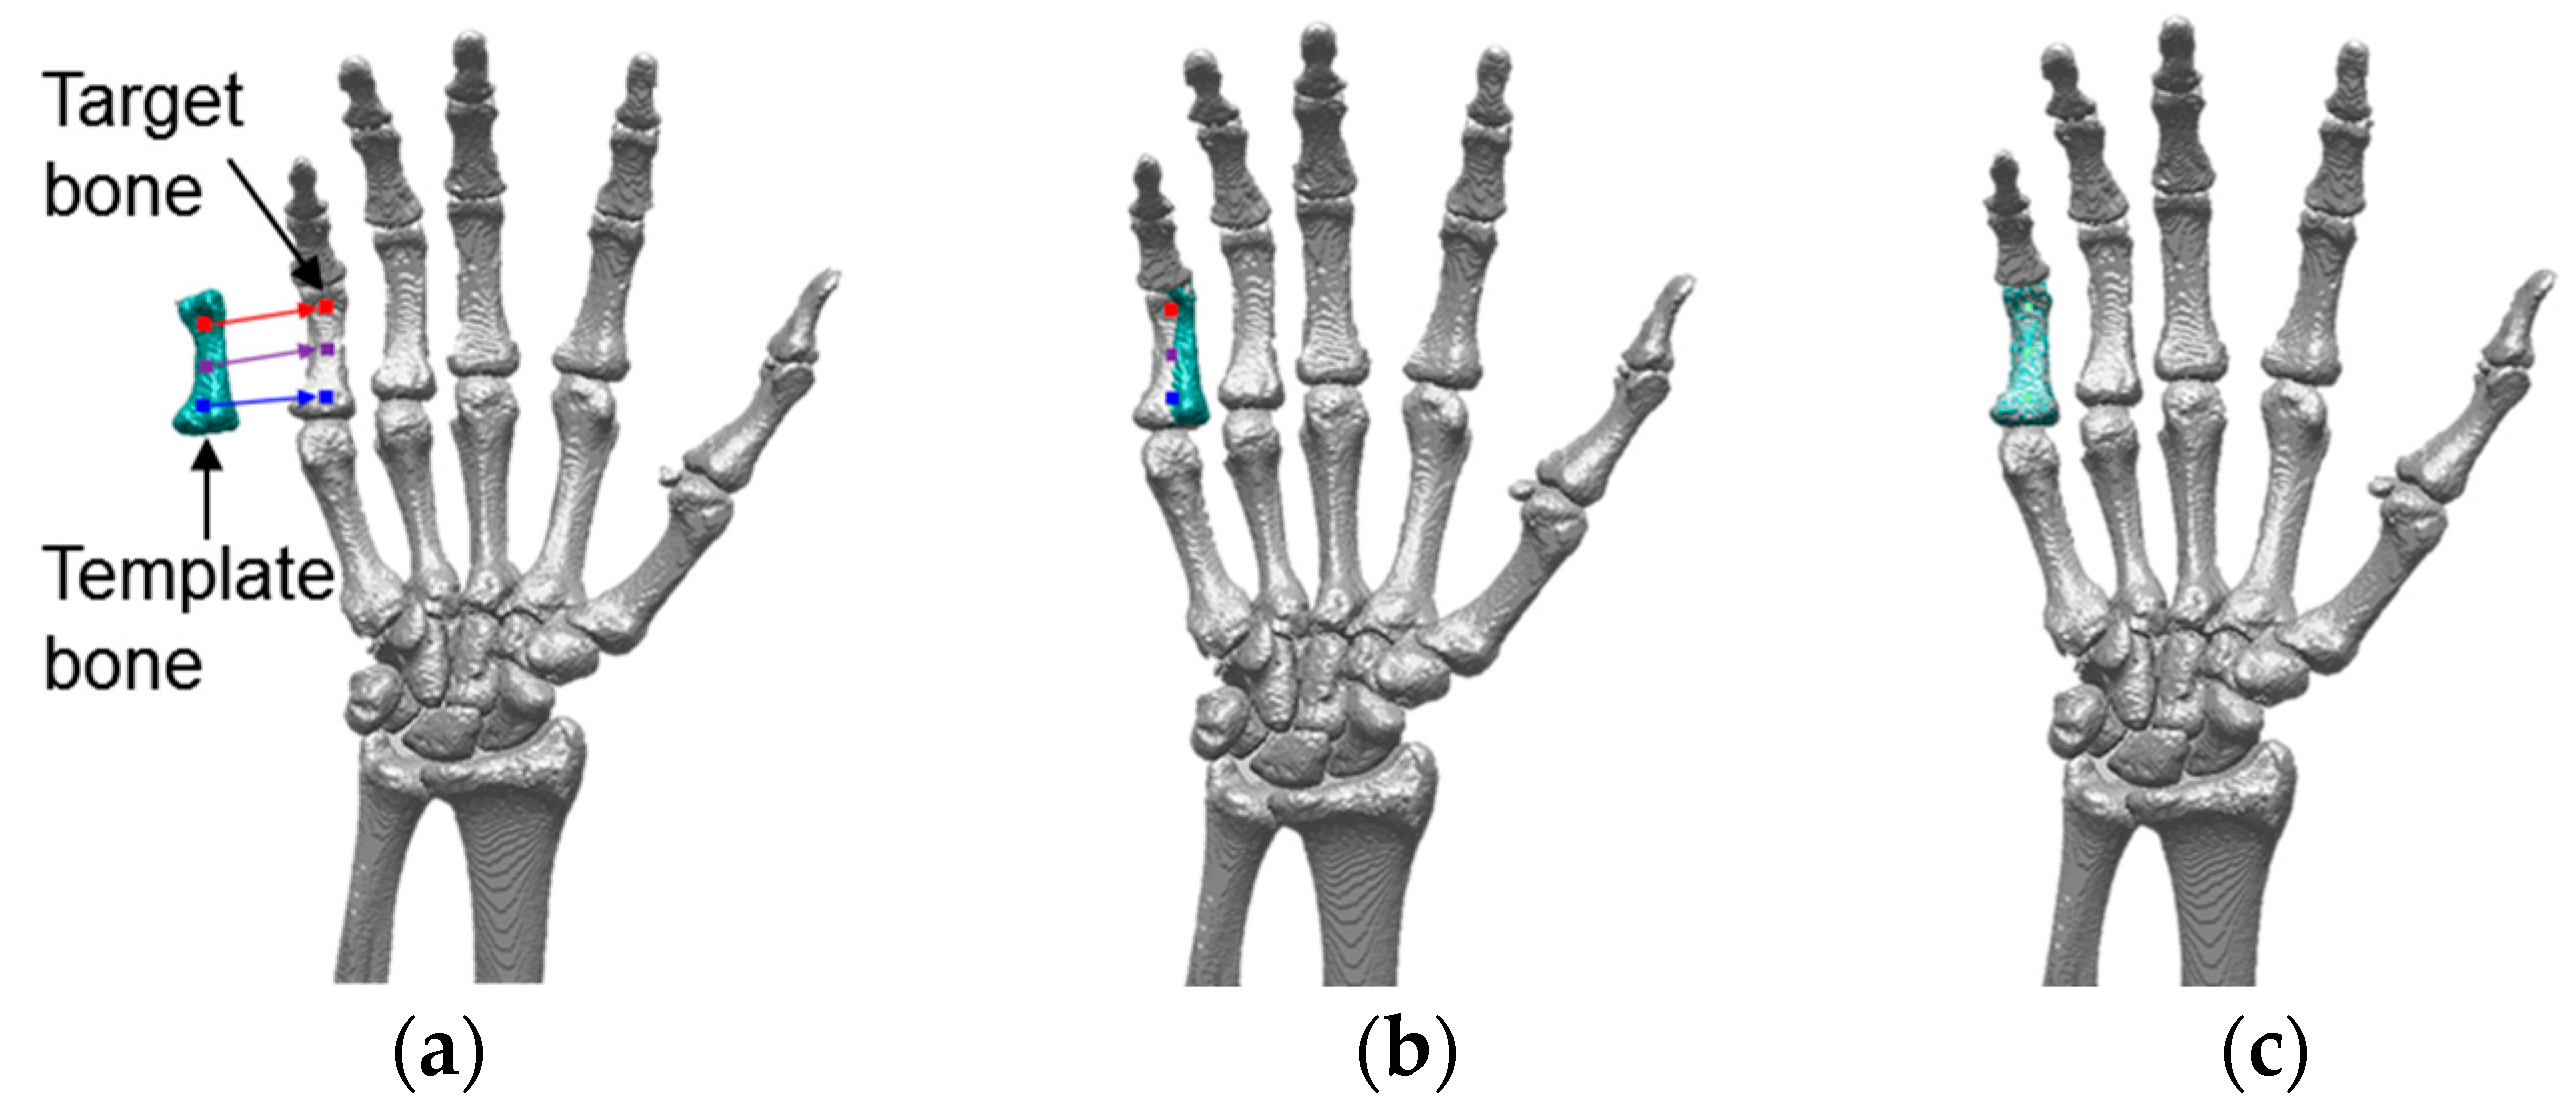 Fingertips rotated about the estimated knuckle poition. Top: Standard